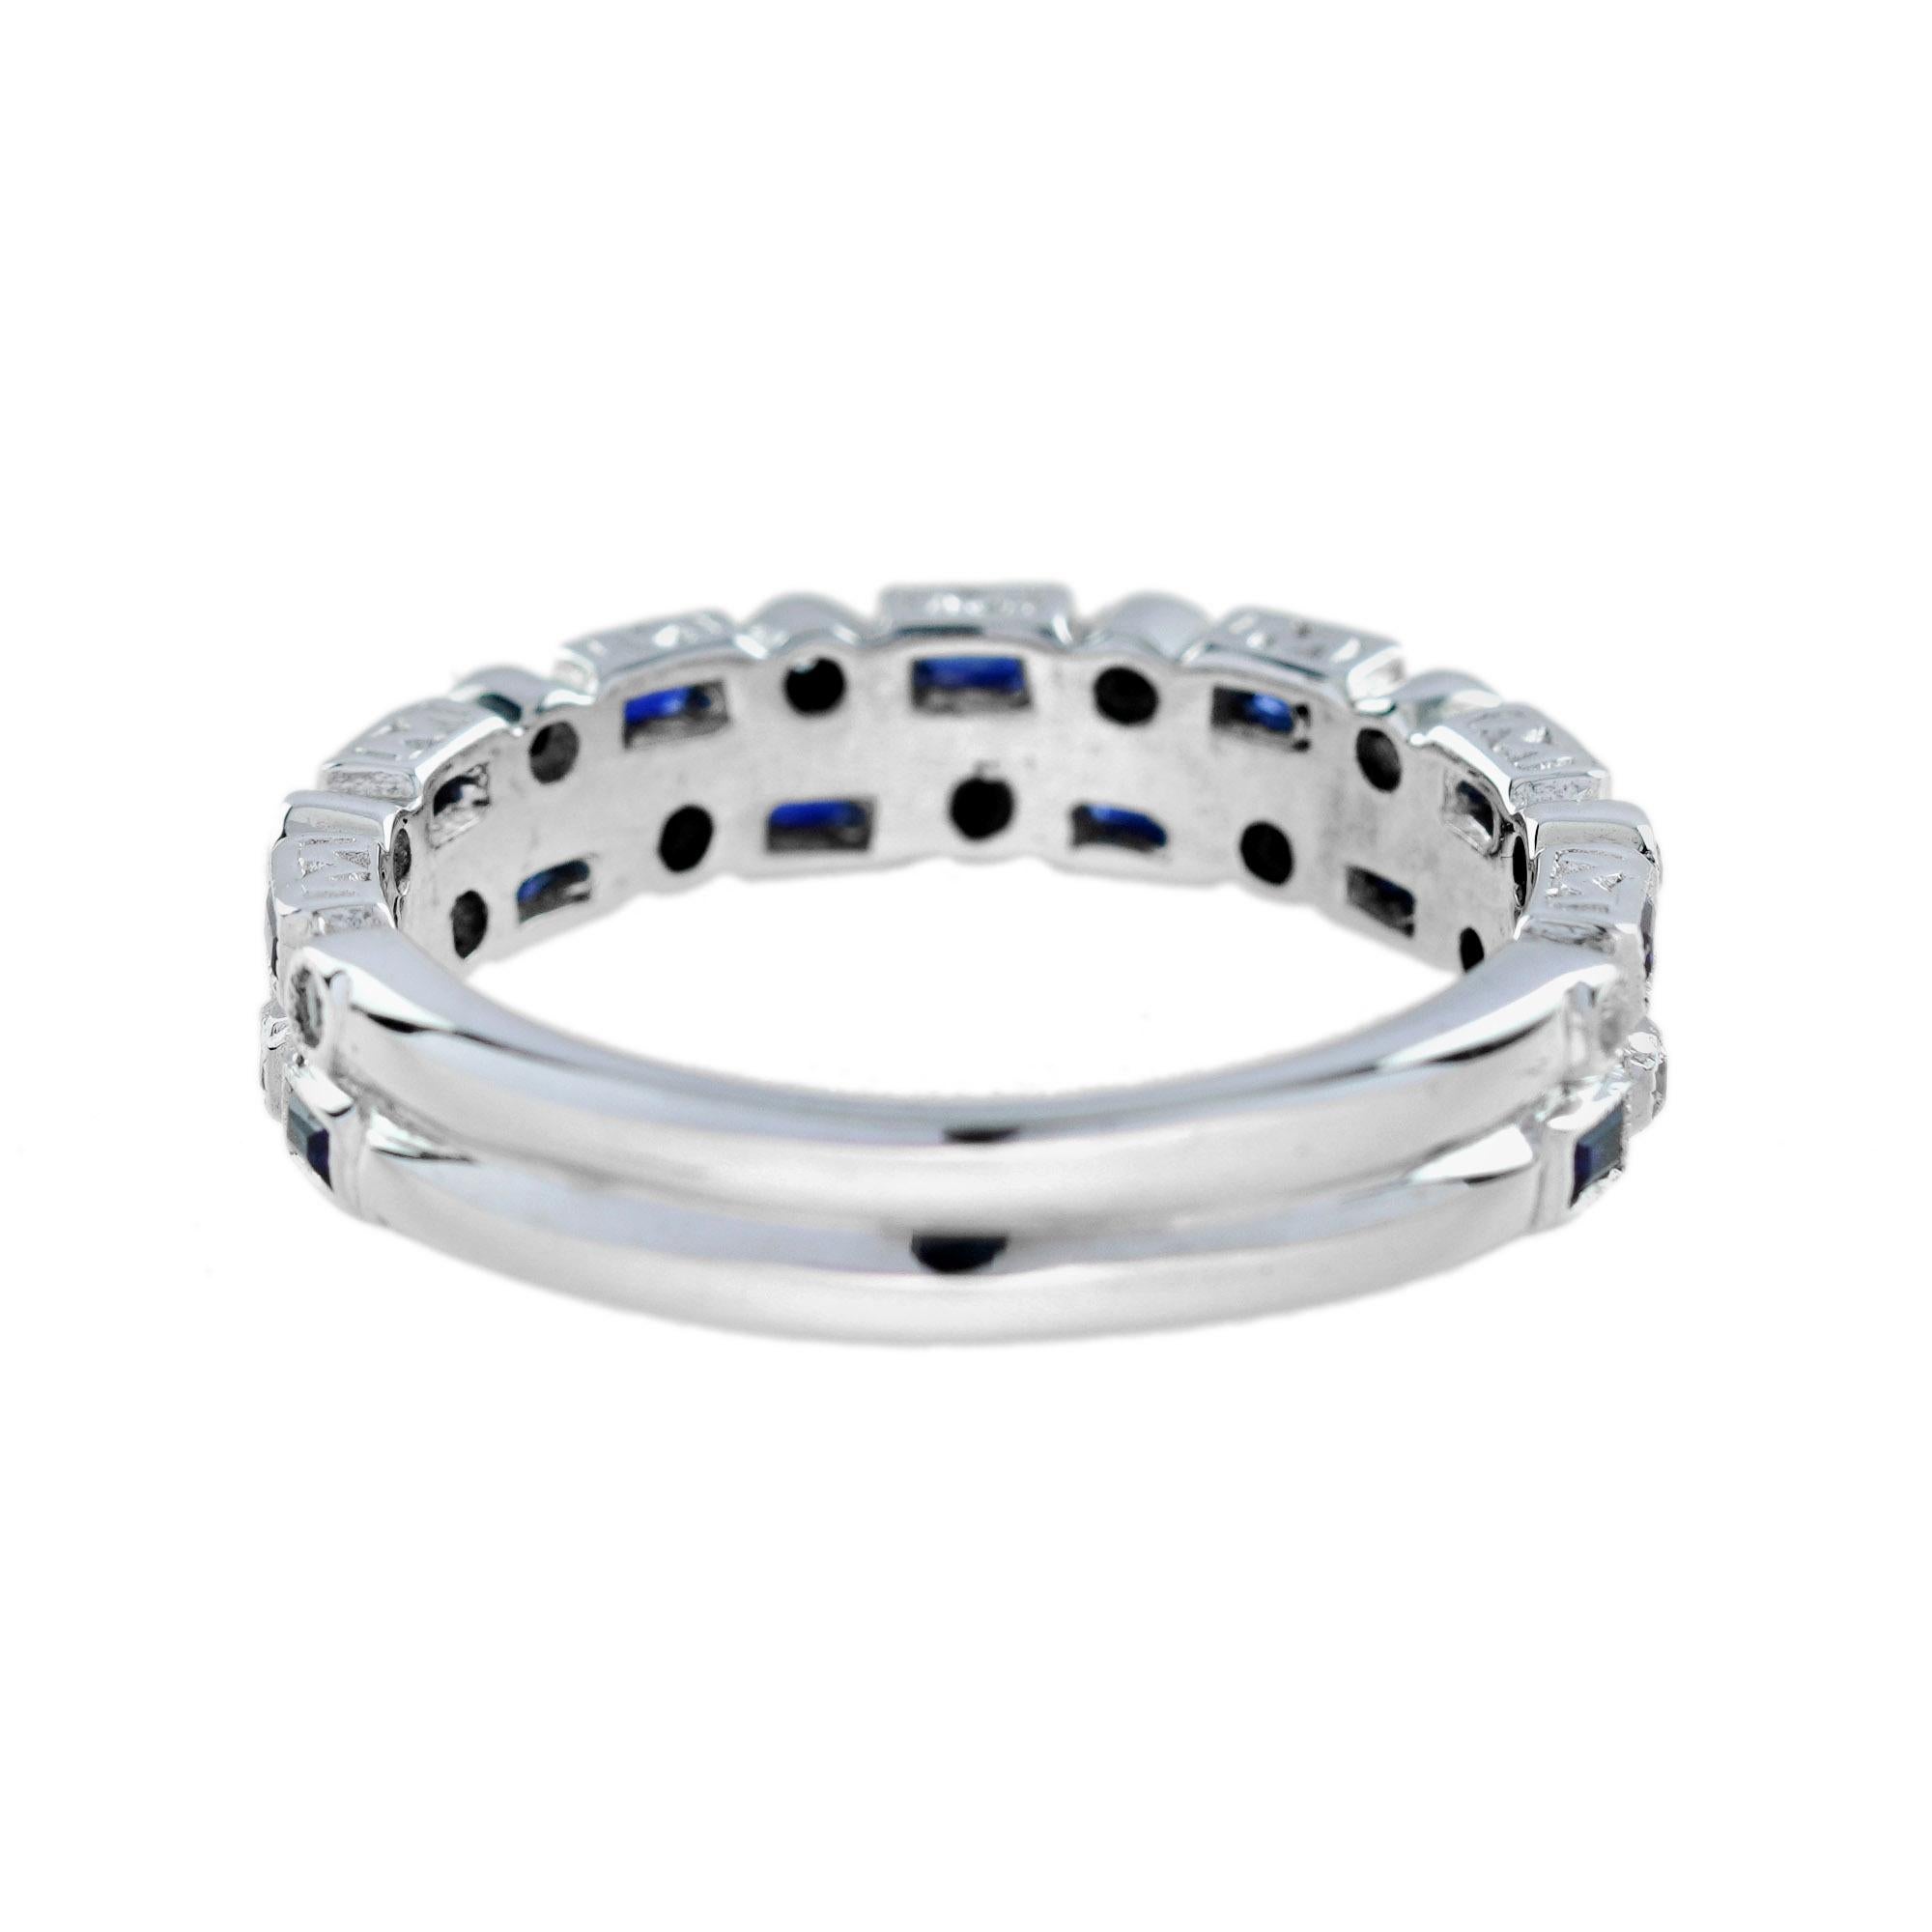 For Sale:  Diamond and Blue Sapphire Art Deco Style Half Eternity Ring in 14K White Gold 5